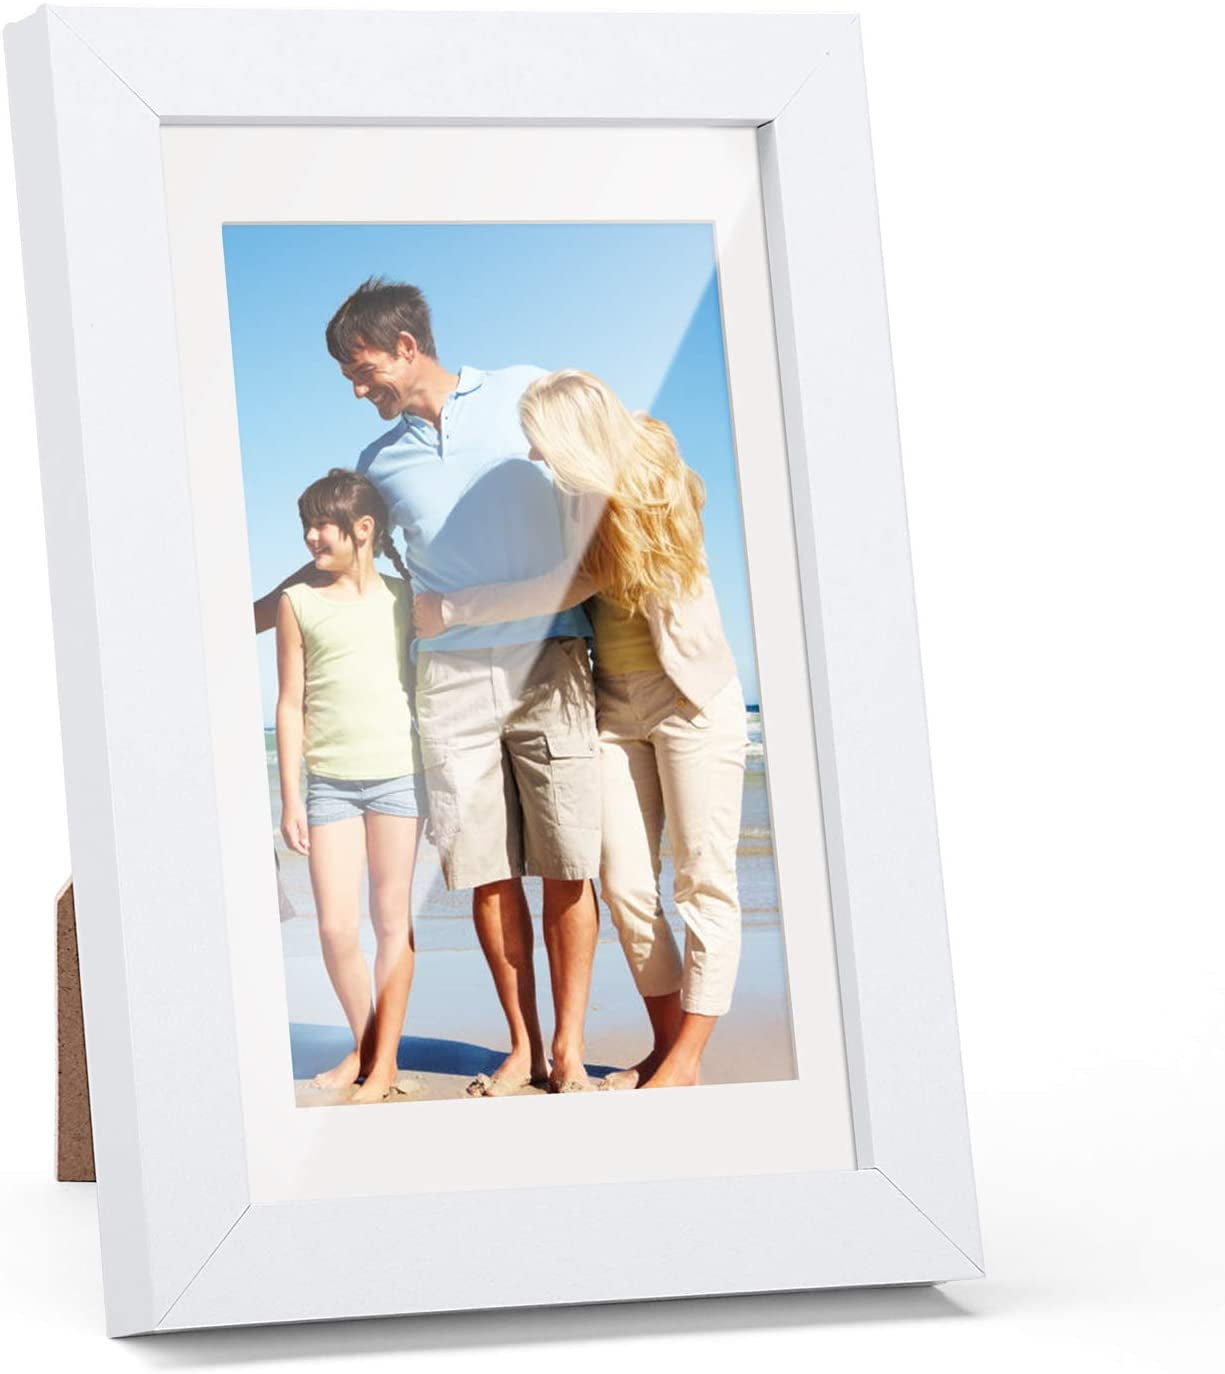 Table Top Display and Wall Mounting MDF Wood Ideal Gift to Family and Friends TWING 4x6 Picture Frame Gold Displays 3.5x5 Photo Frame with Mat or 4x6 Inch Without Mat Shatter-Resistant Plexiglass